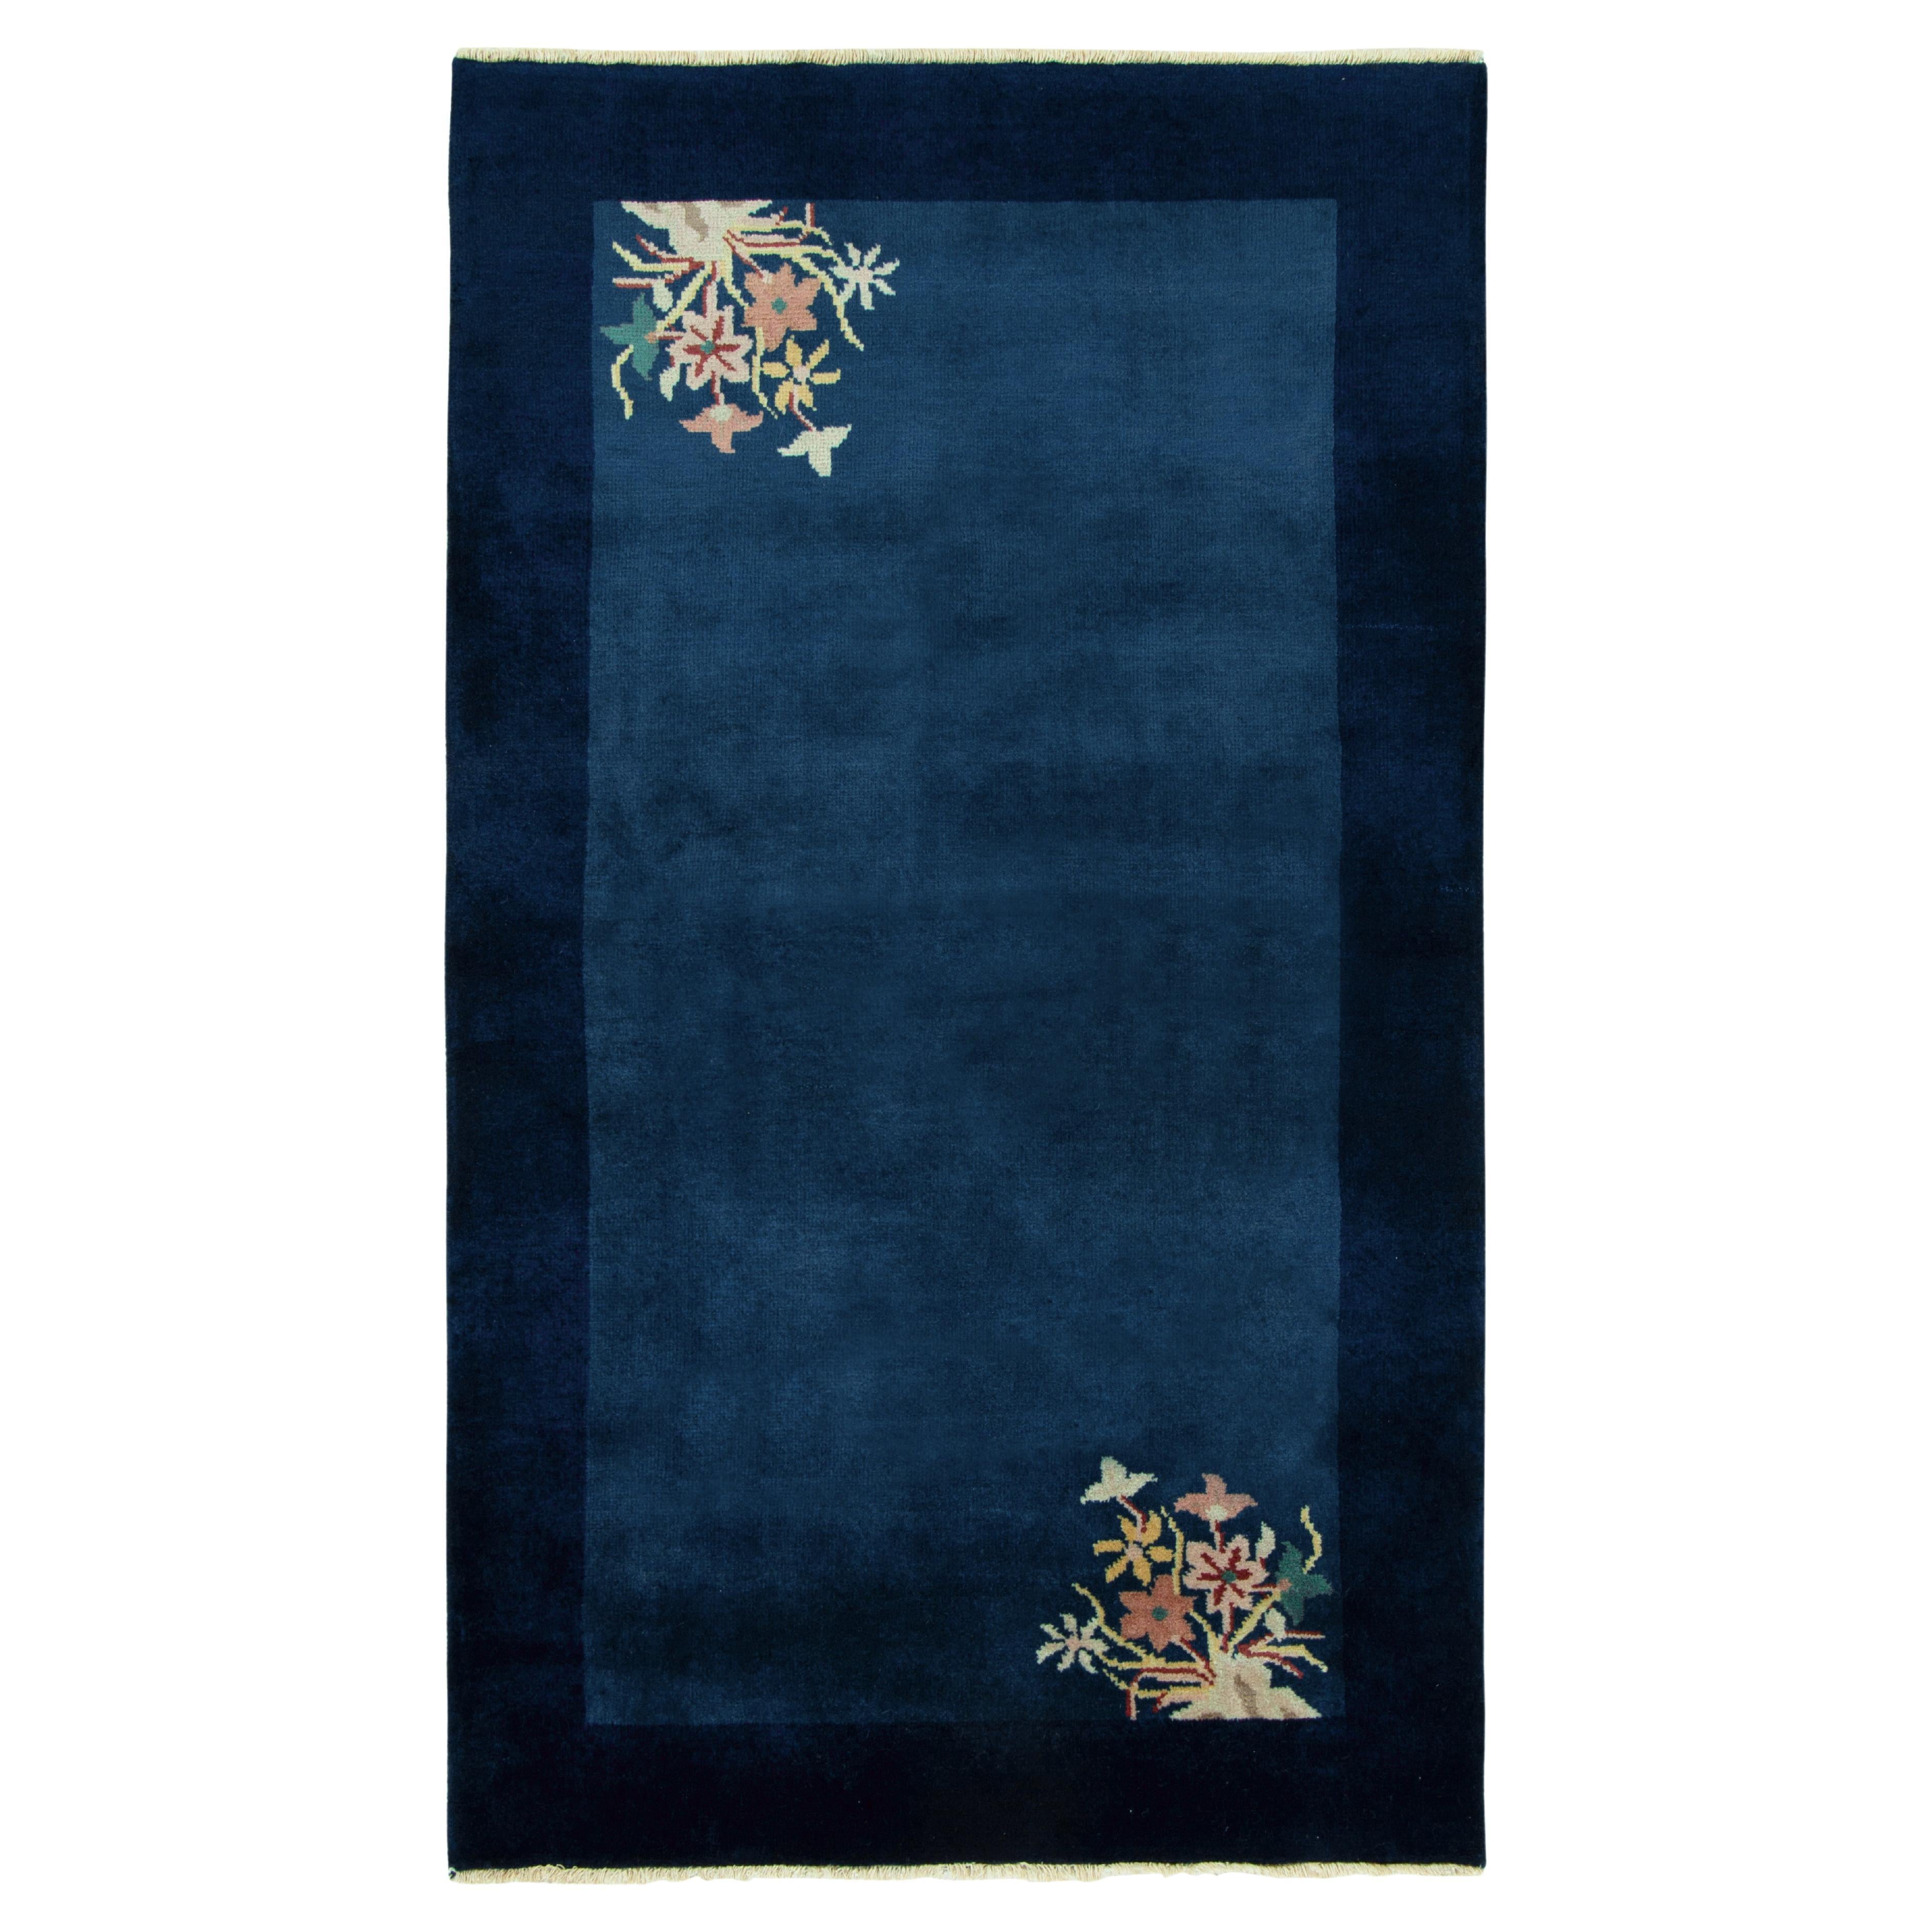 Vintage Chinese Deco Style Rug in Blue with Floral Patterns by Rug & Kilim